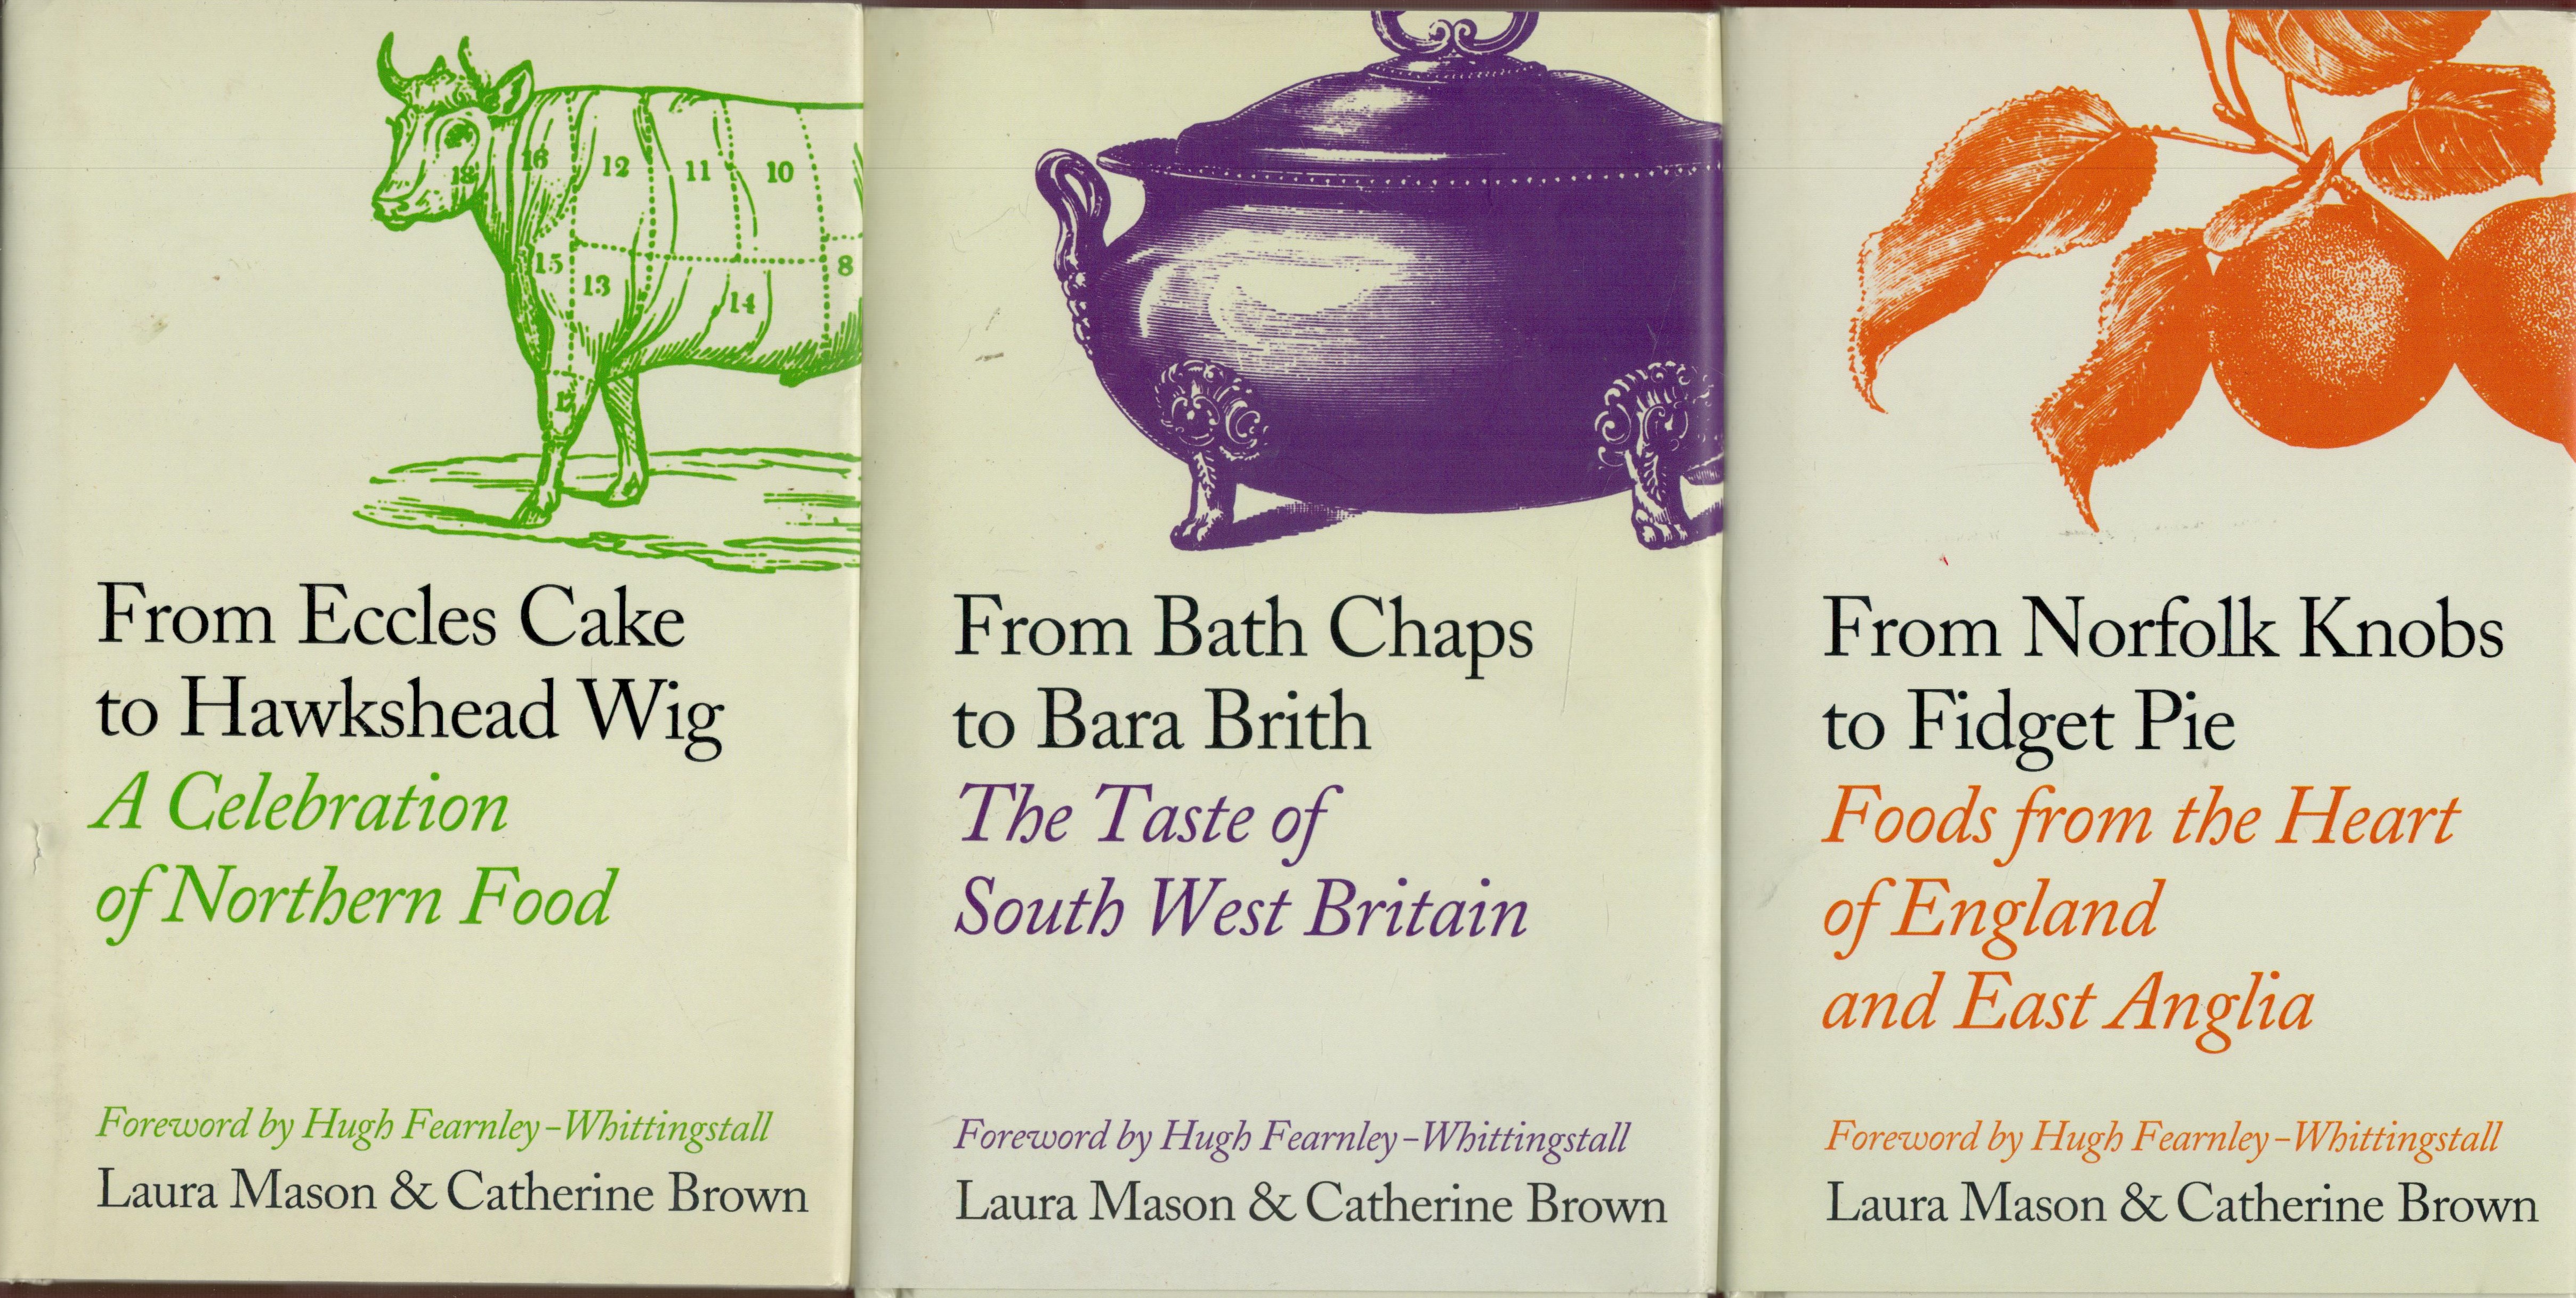 3 x Books From Norfolk Knobs to Fidget Pie, From Bath Chaps to Bara Brith, From Eccles Cake to